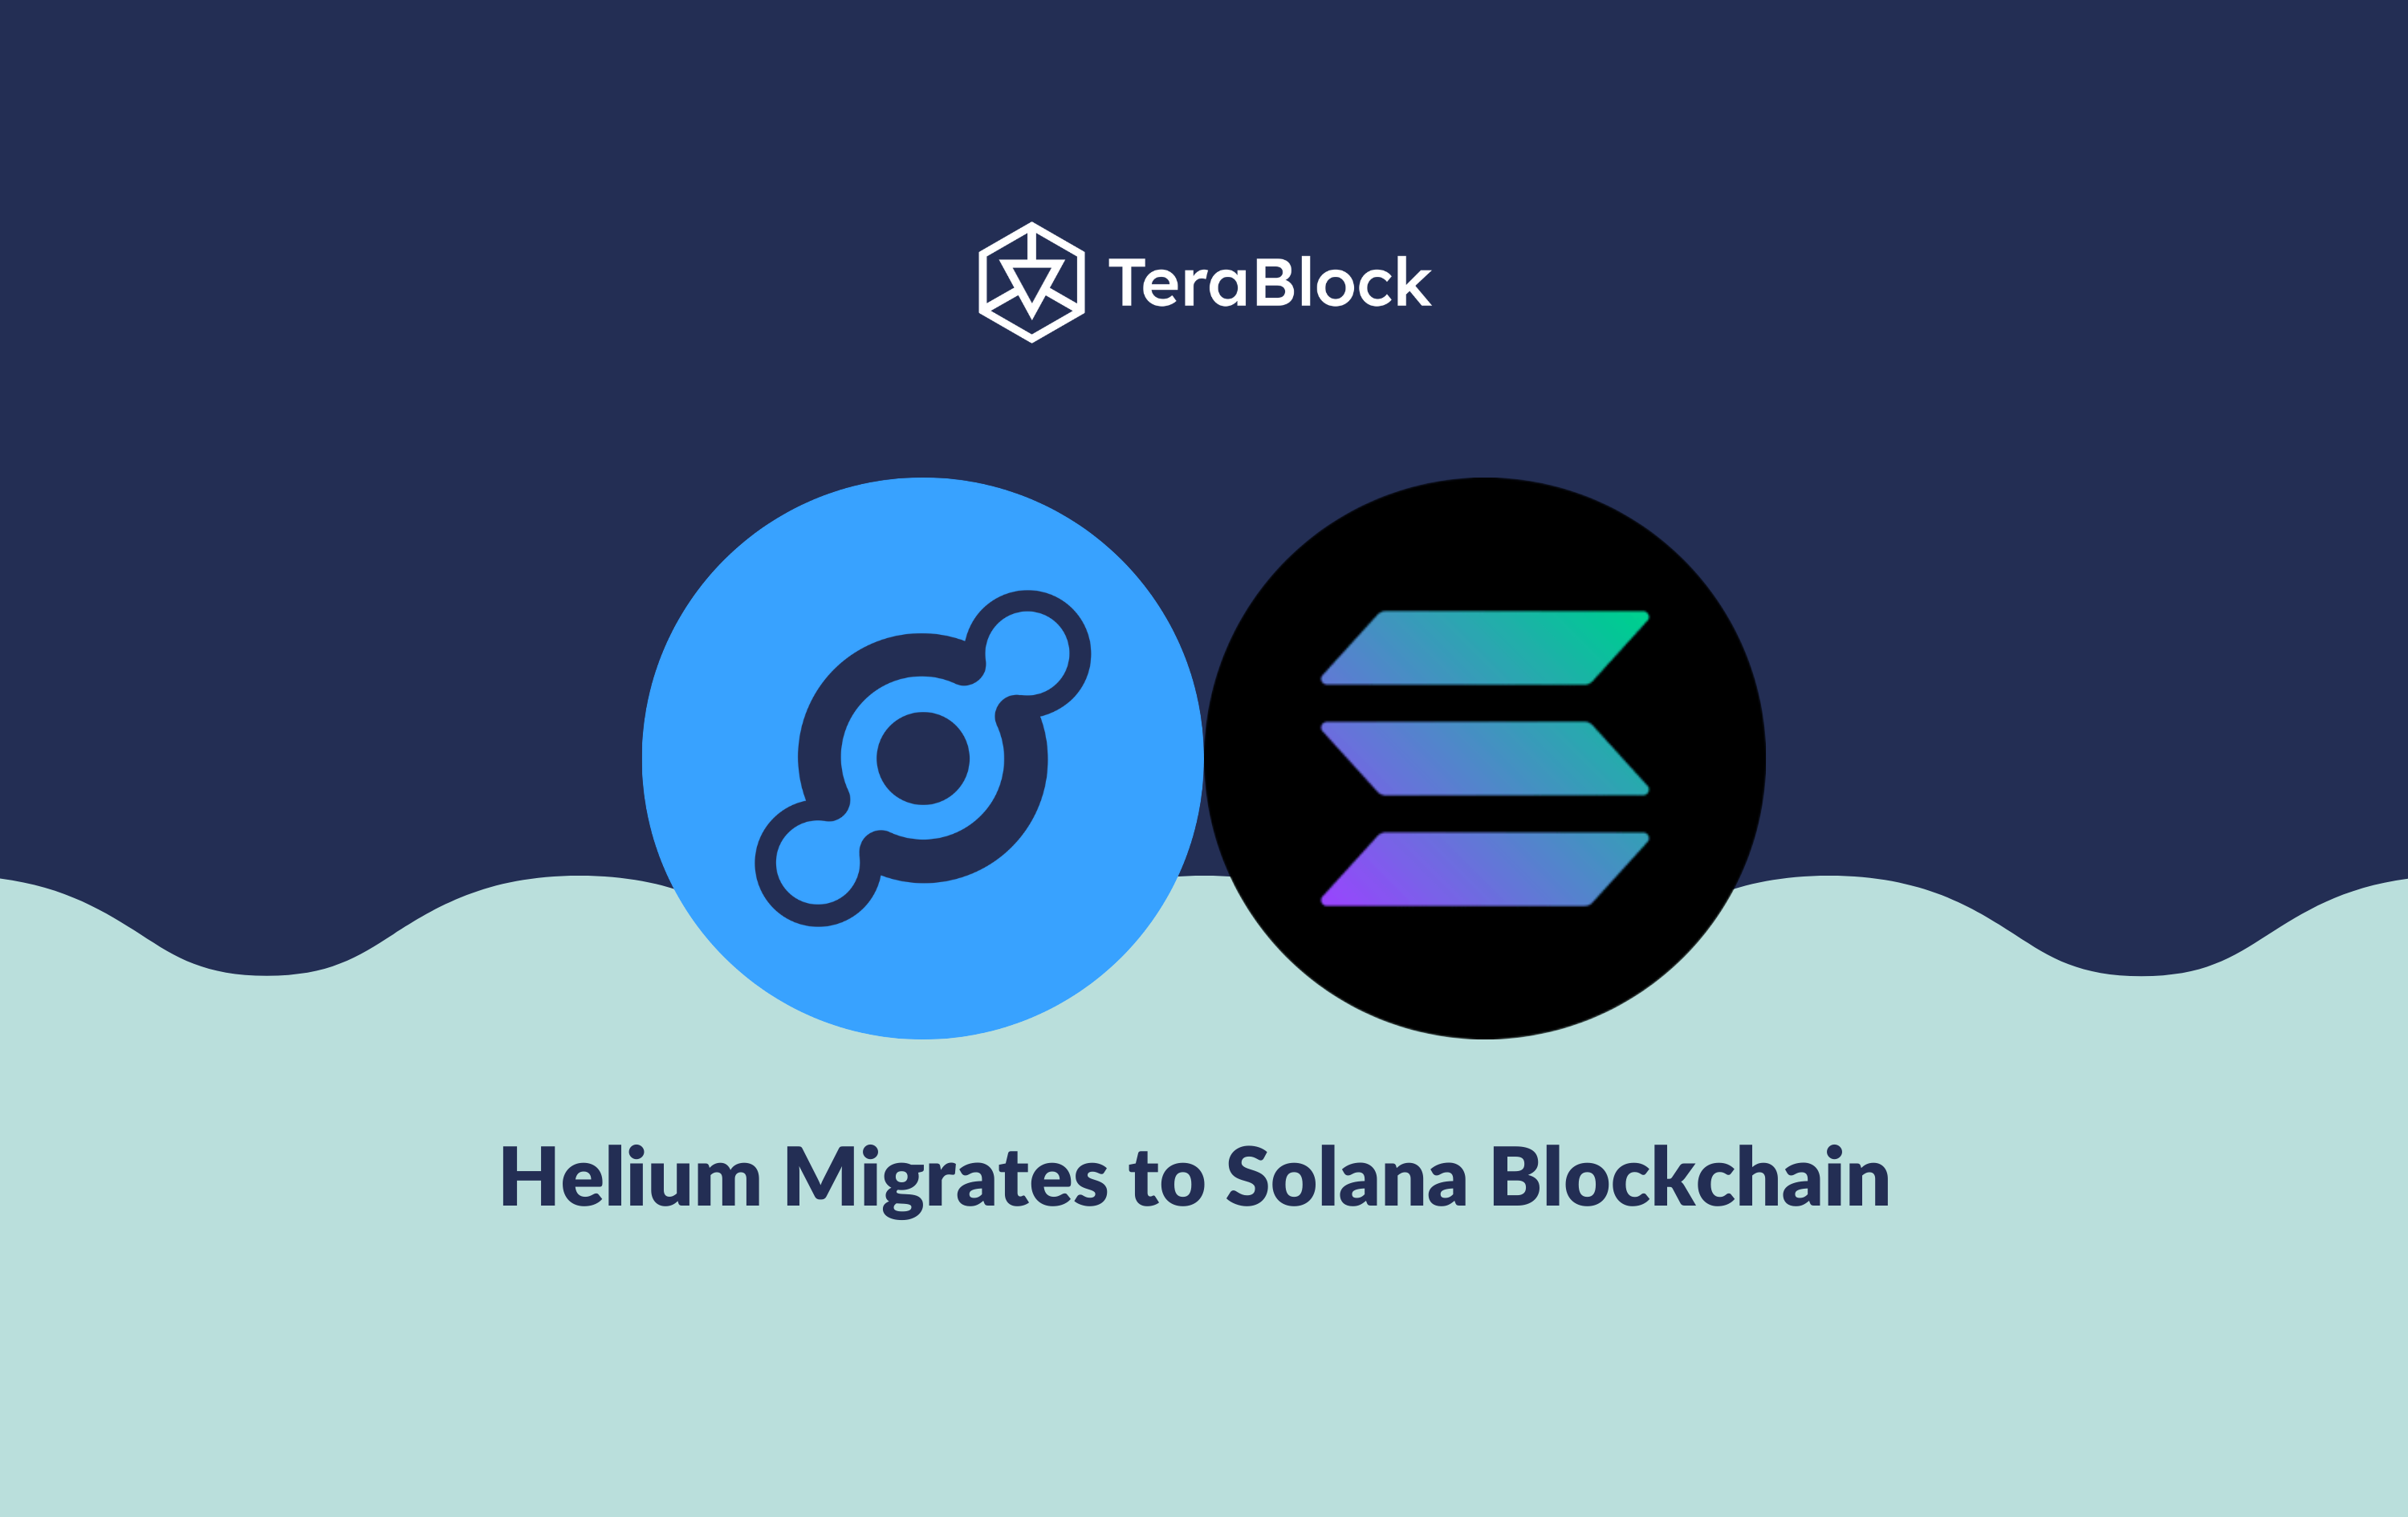 Helium migrates to Solana Blockchain to Expand Ecosystem and Improve Network Performance